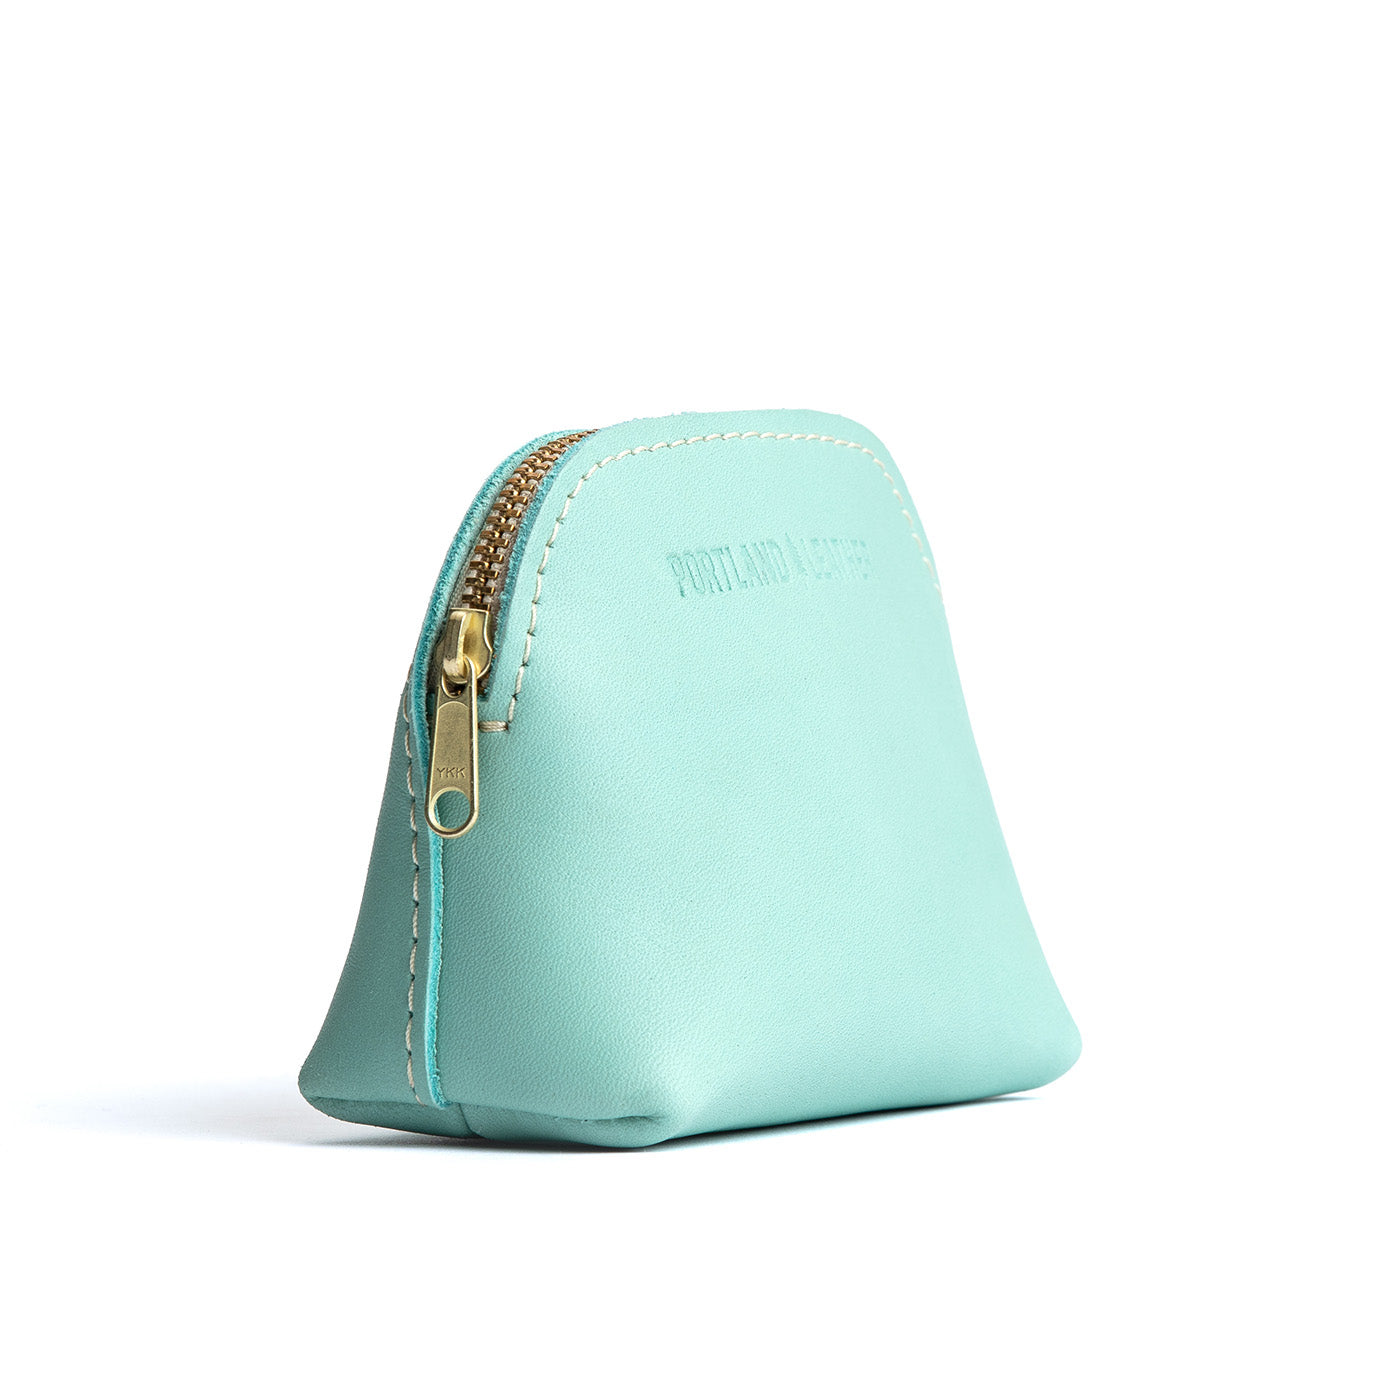 Mint*Mini | Compact leather pouch with top zipper